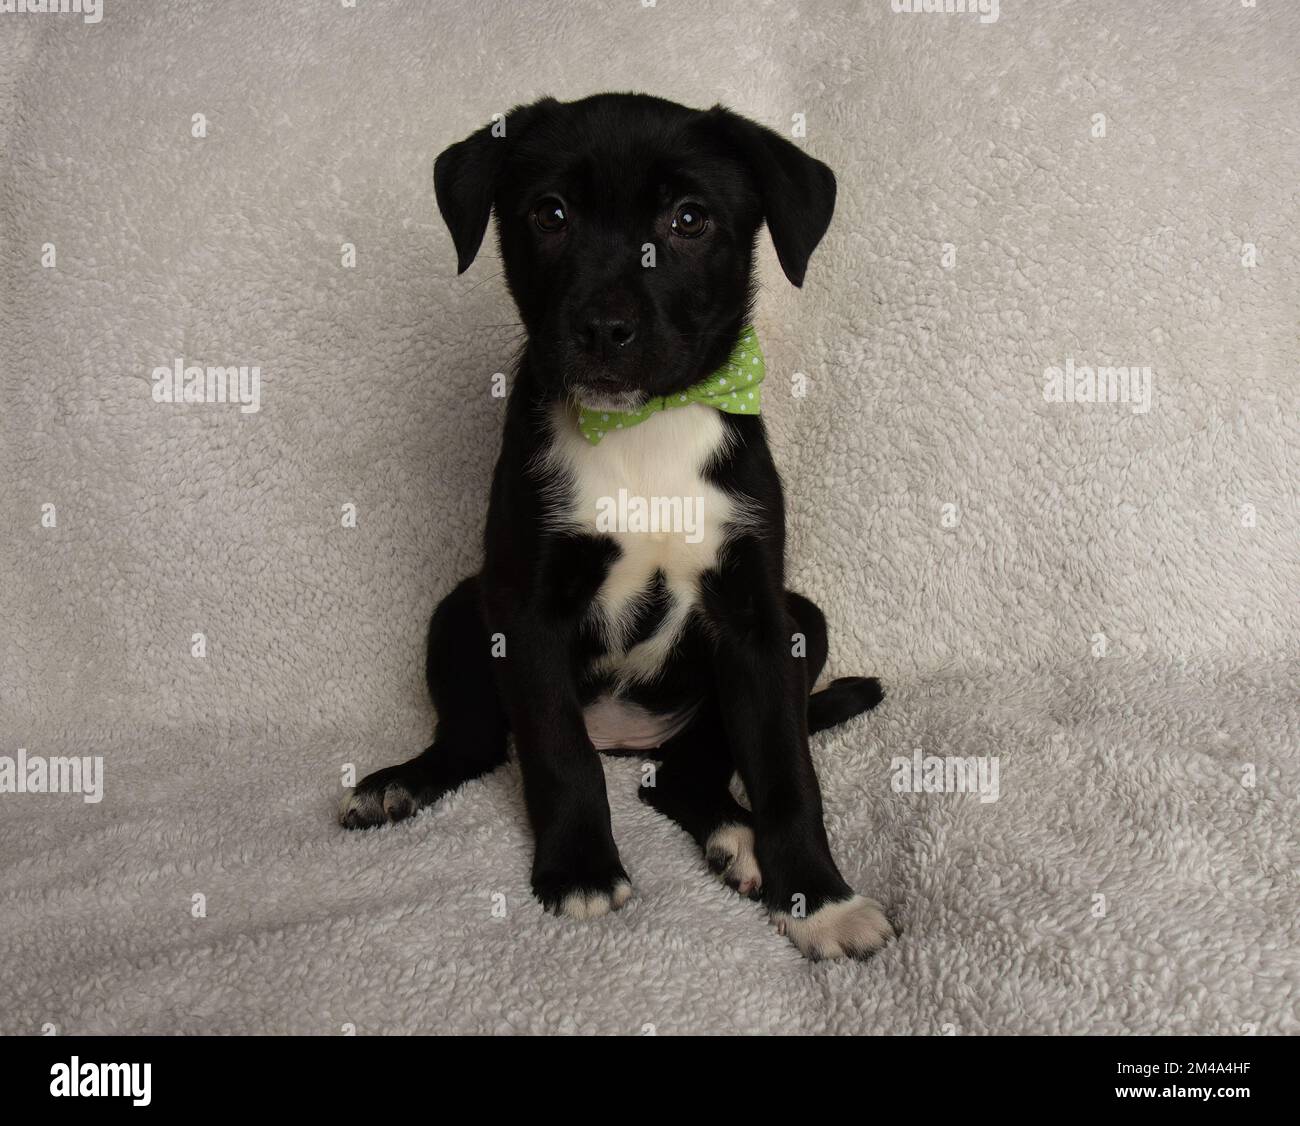 cute black and white young mastiff mix puppy sitting down Stock Photo